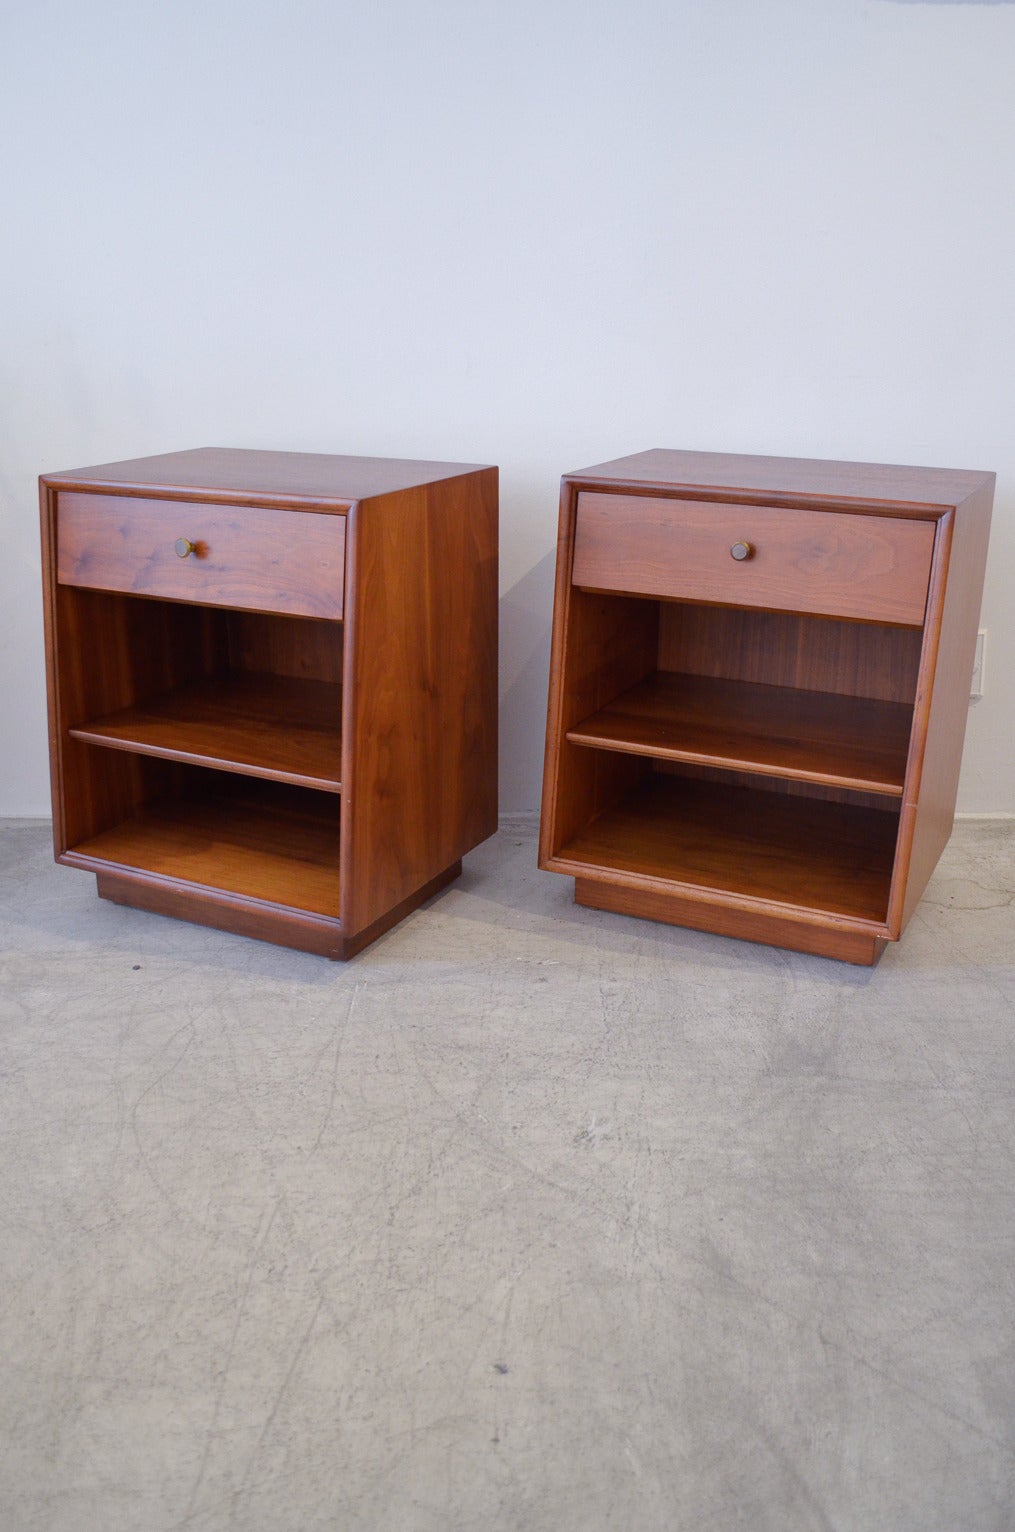 Beautiful pair of Kipp Stewart for Drexel nightstands or side tables with adjustable inner shelf, sliding drawer and original hardware. Professionally restored in showroom condition.